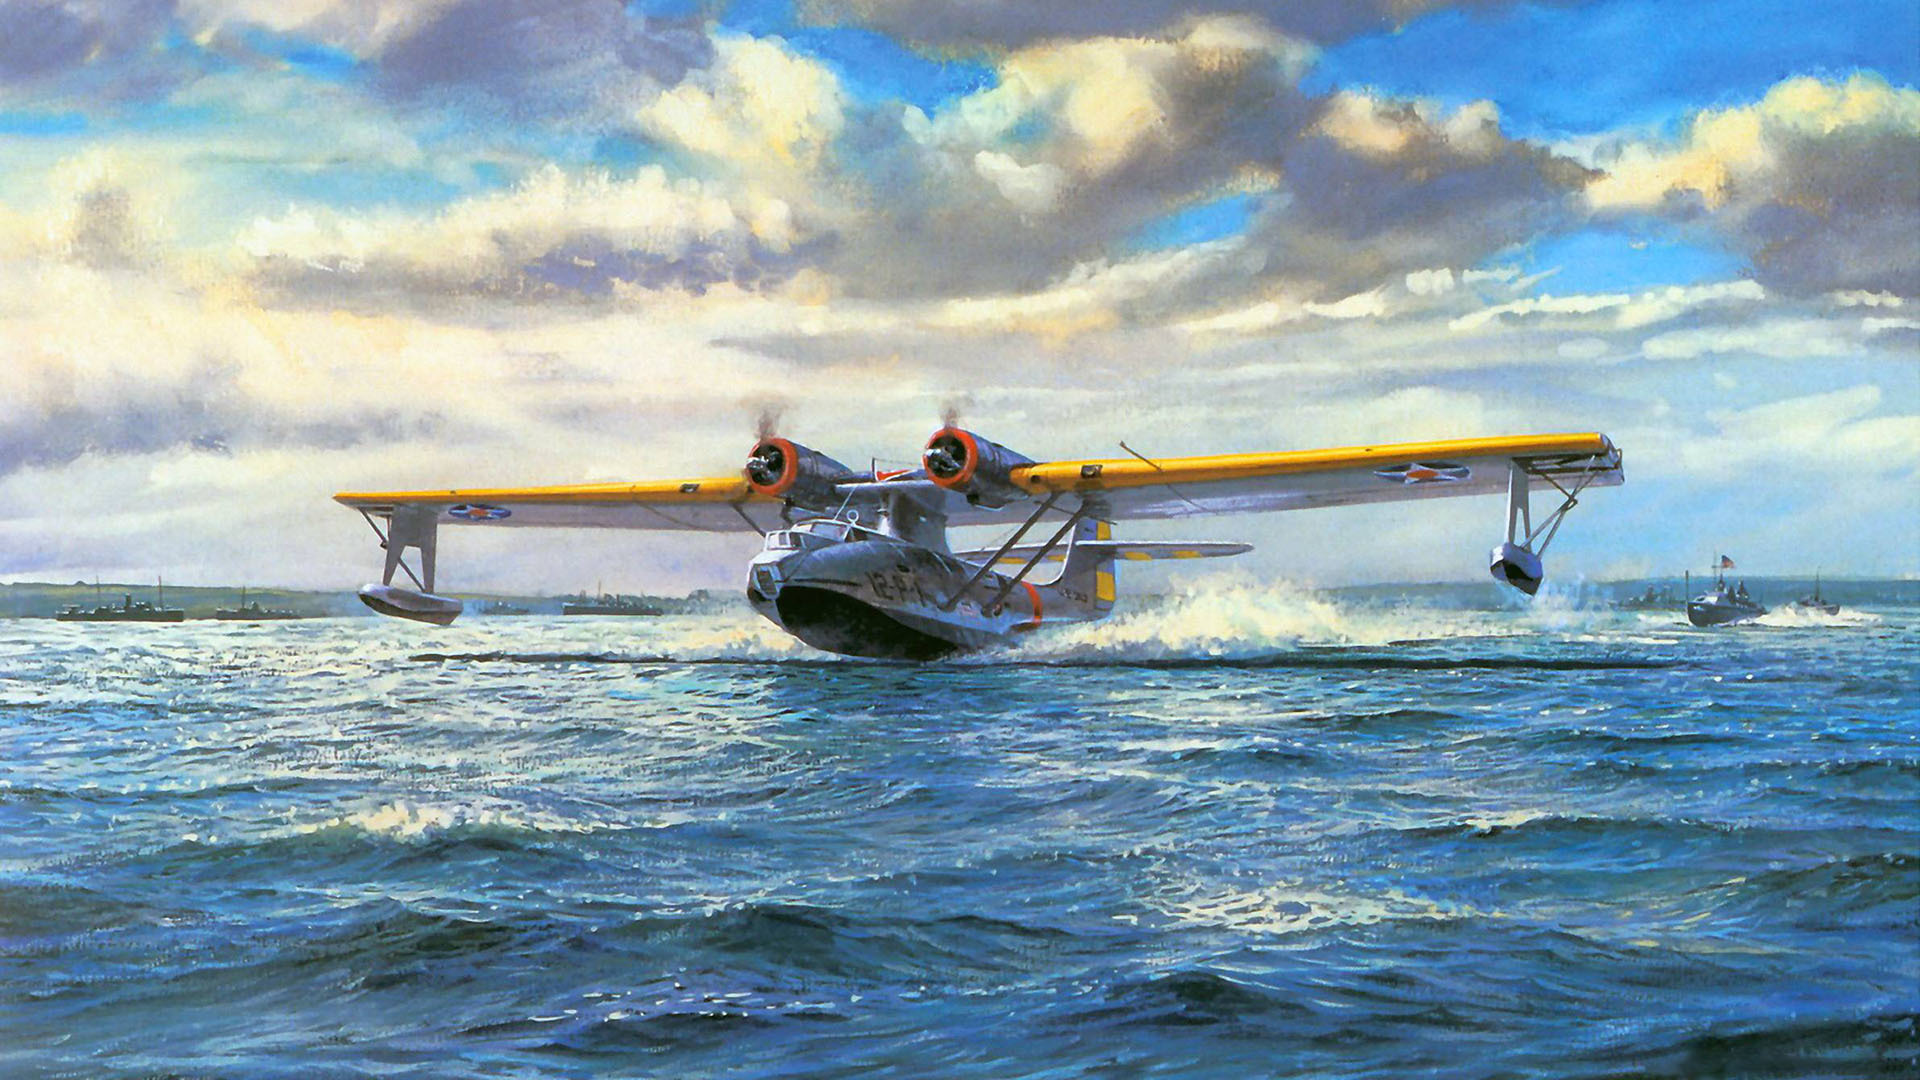 General 1920x1080 World War II war military aircraft airplane military aircraft Consolidated PBY Catalina USA Flying boat air force painting take-off US Air Force Roy Cross floatplane sky clouds water American aircraft